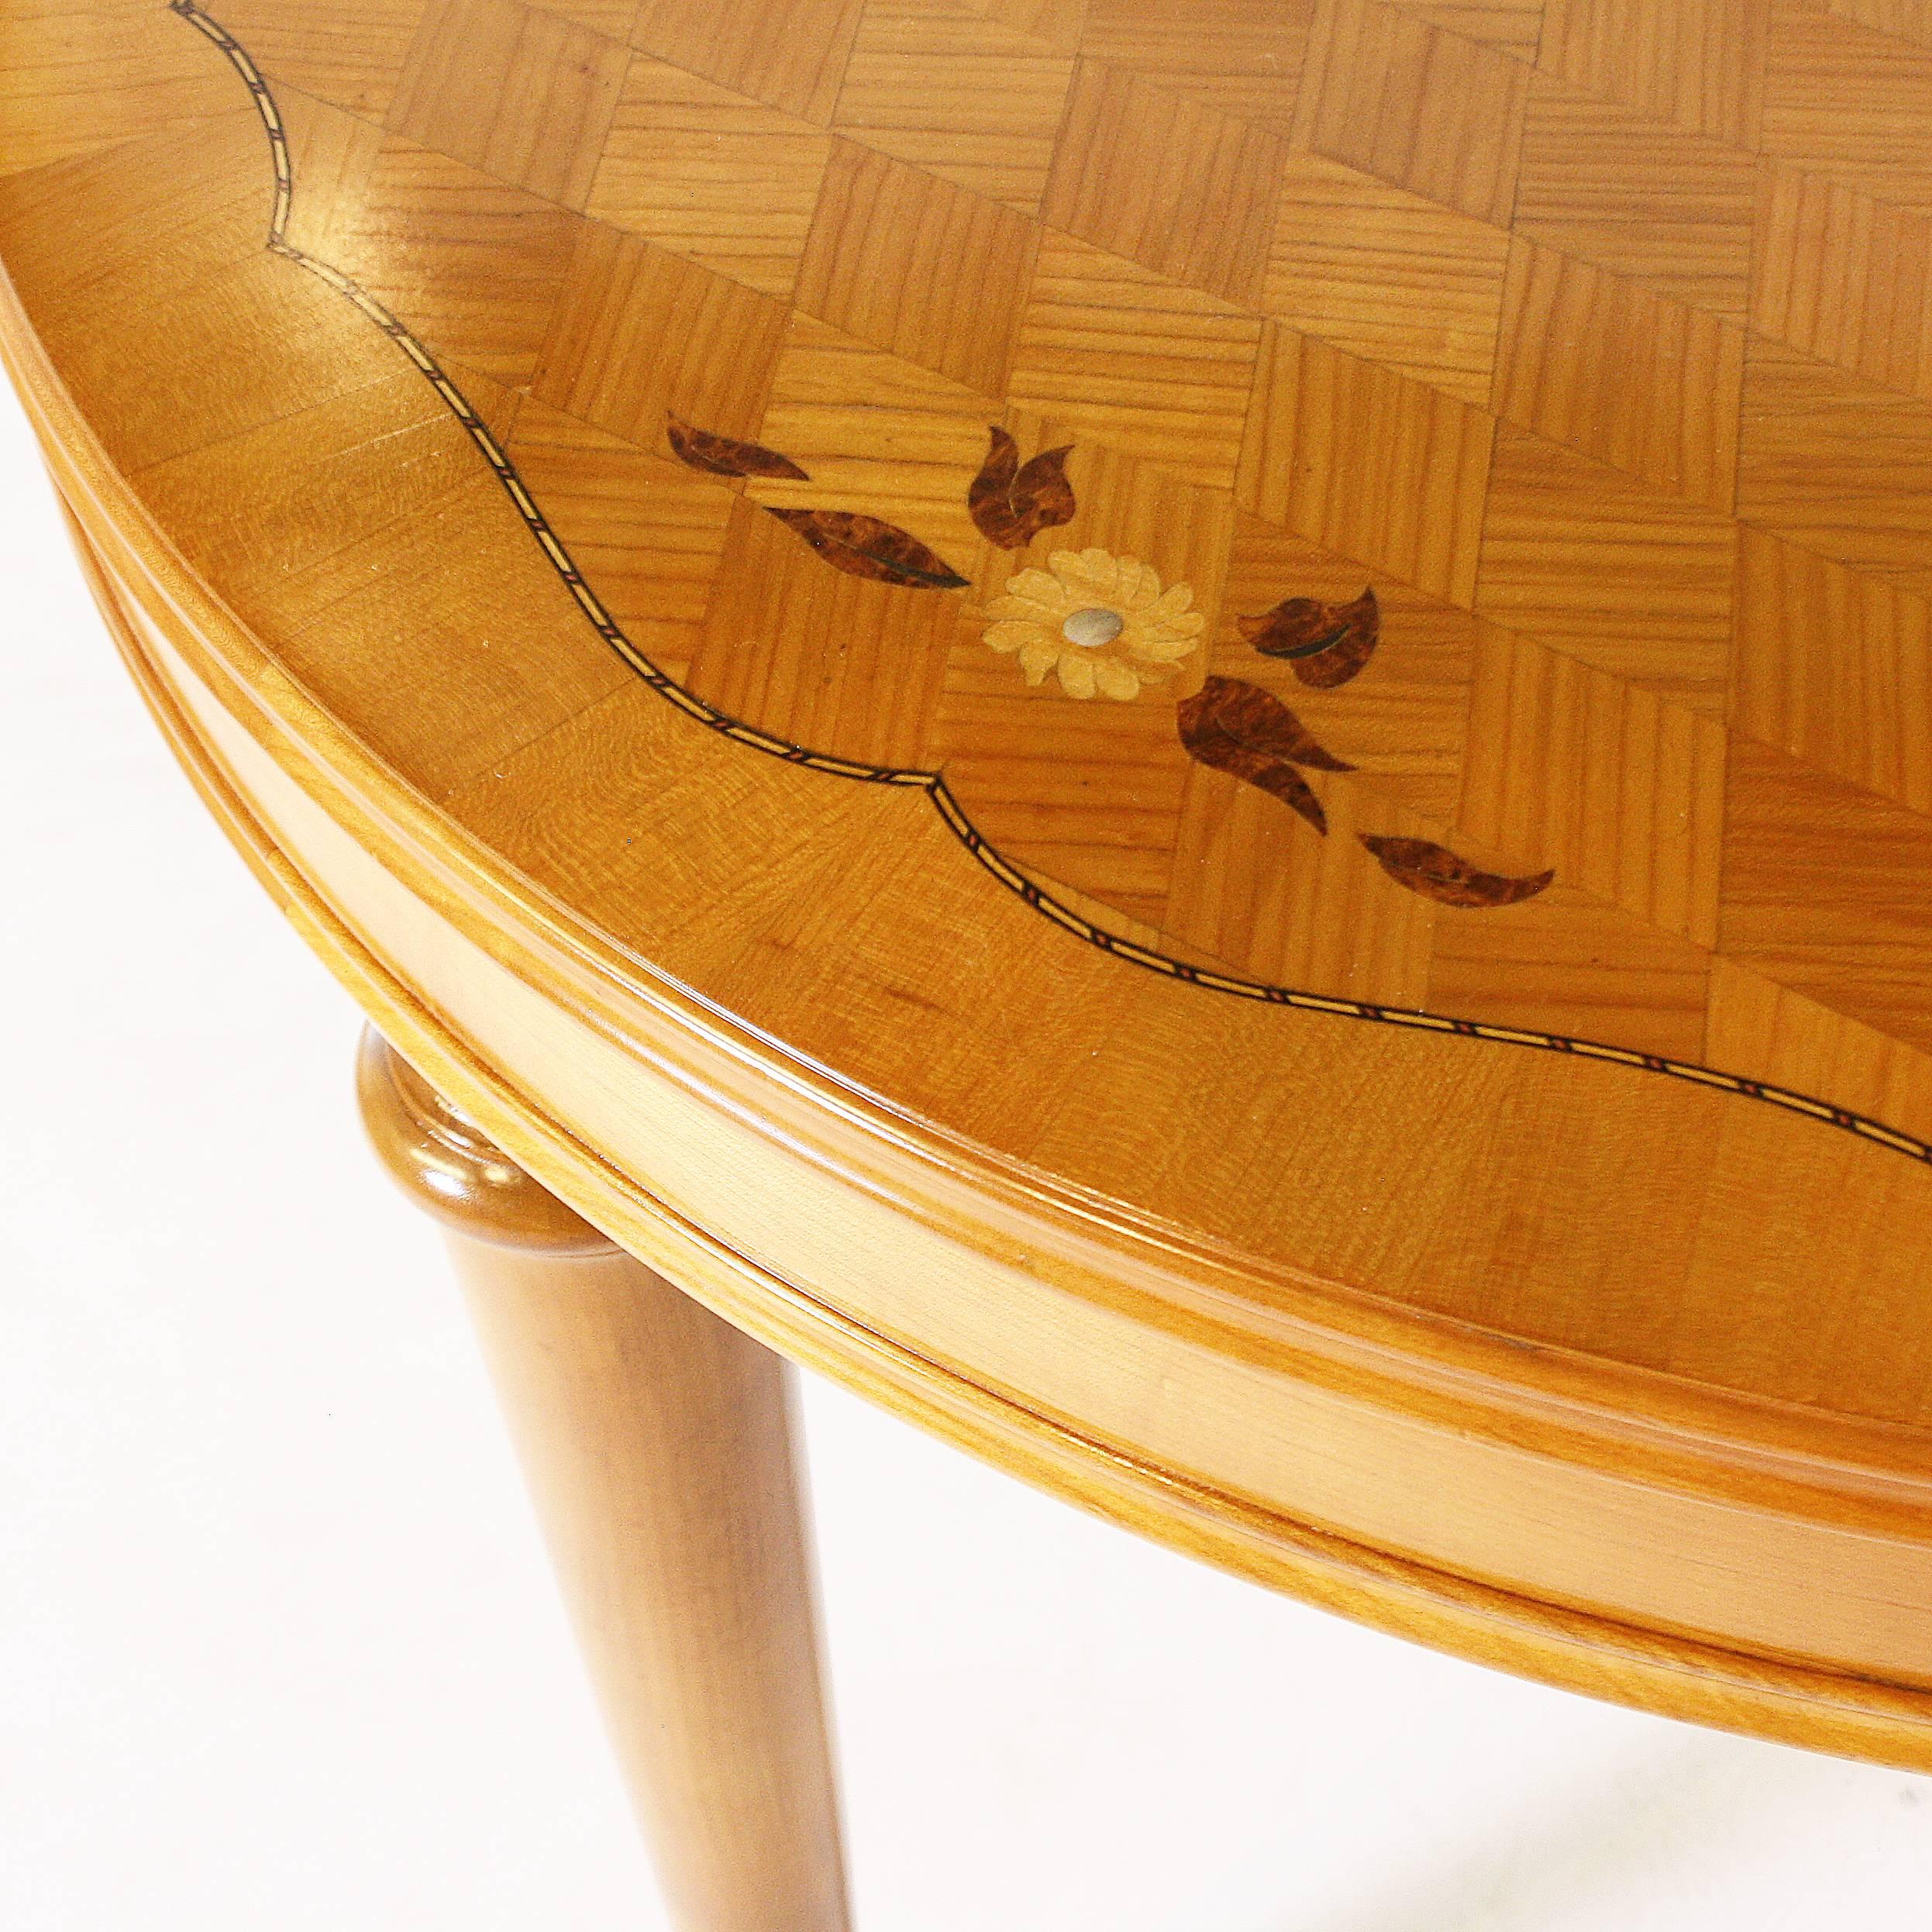 This French table has a beautifully restored marquetry top with mother-of-pearl detail.